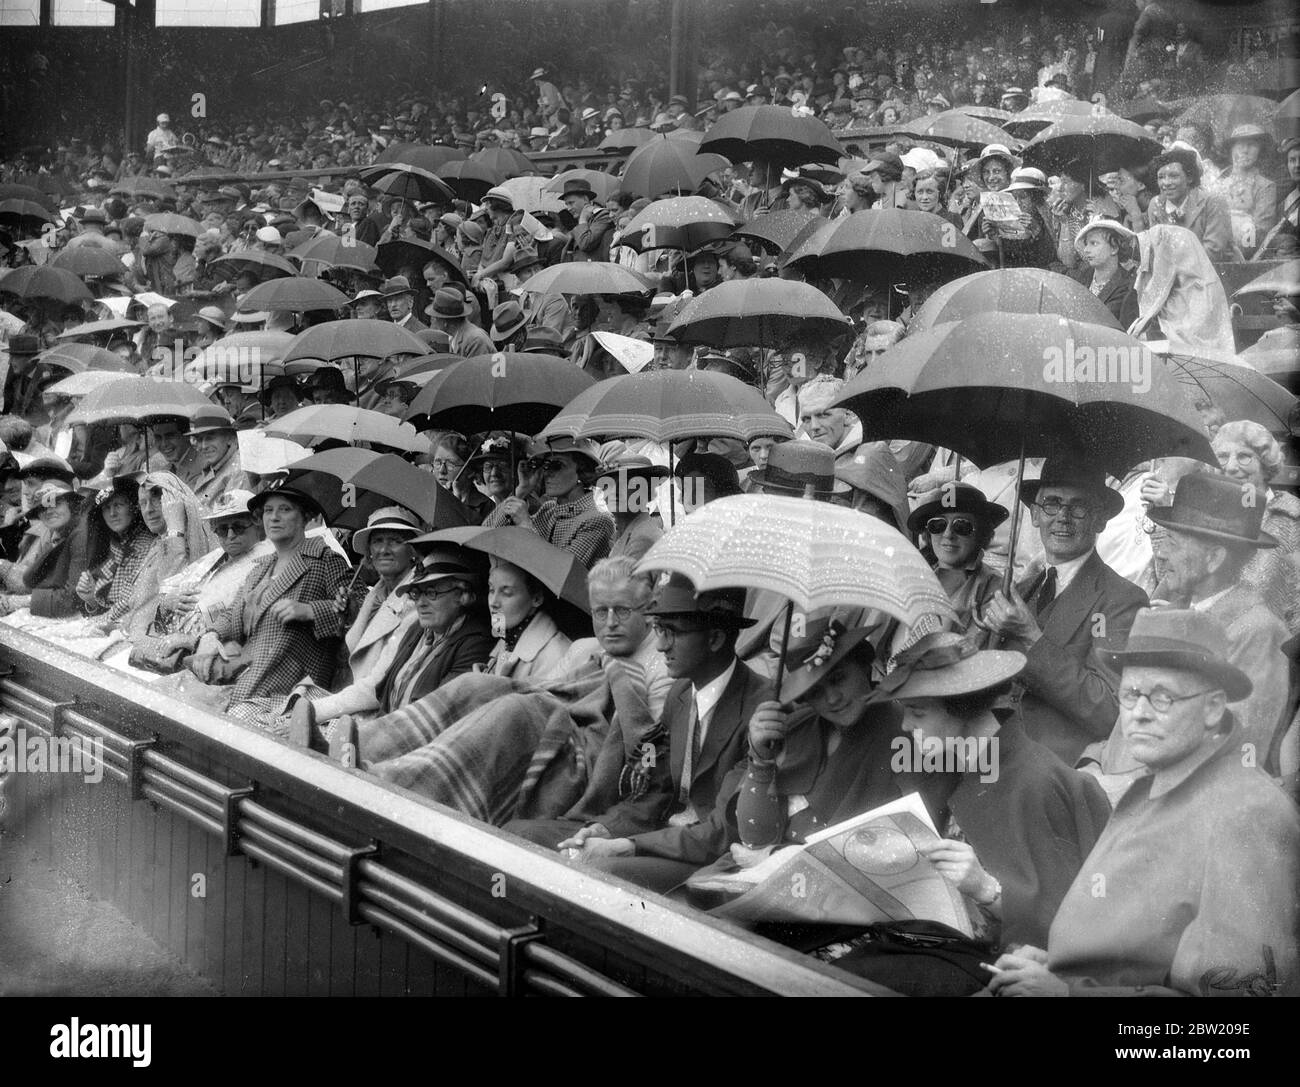 For the first time since the championships commenced, rain stopped play on the Central Court at Wimbledon, during the match between Fru Sperling, the Danish favourite for the women's title, and Miss Alice Marble, the American women's champion. Umbrellas sheltering the crowd on the Centre Court. 29 June 1937 Stock Photo